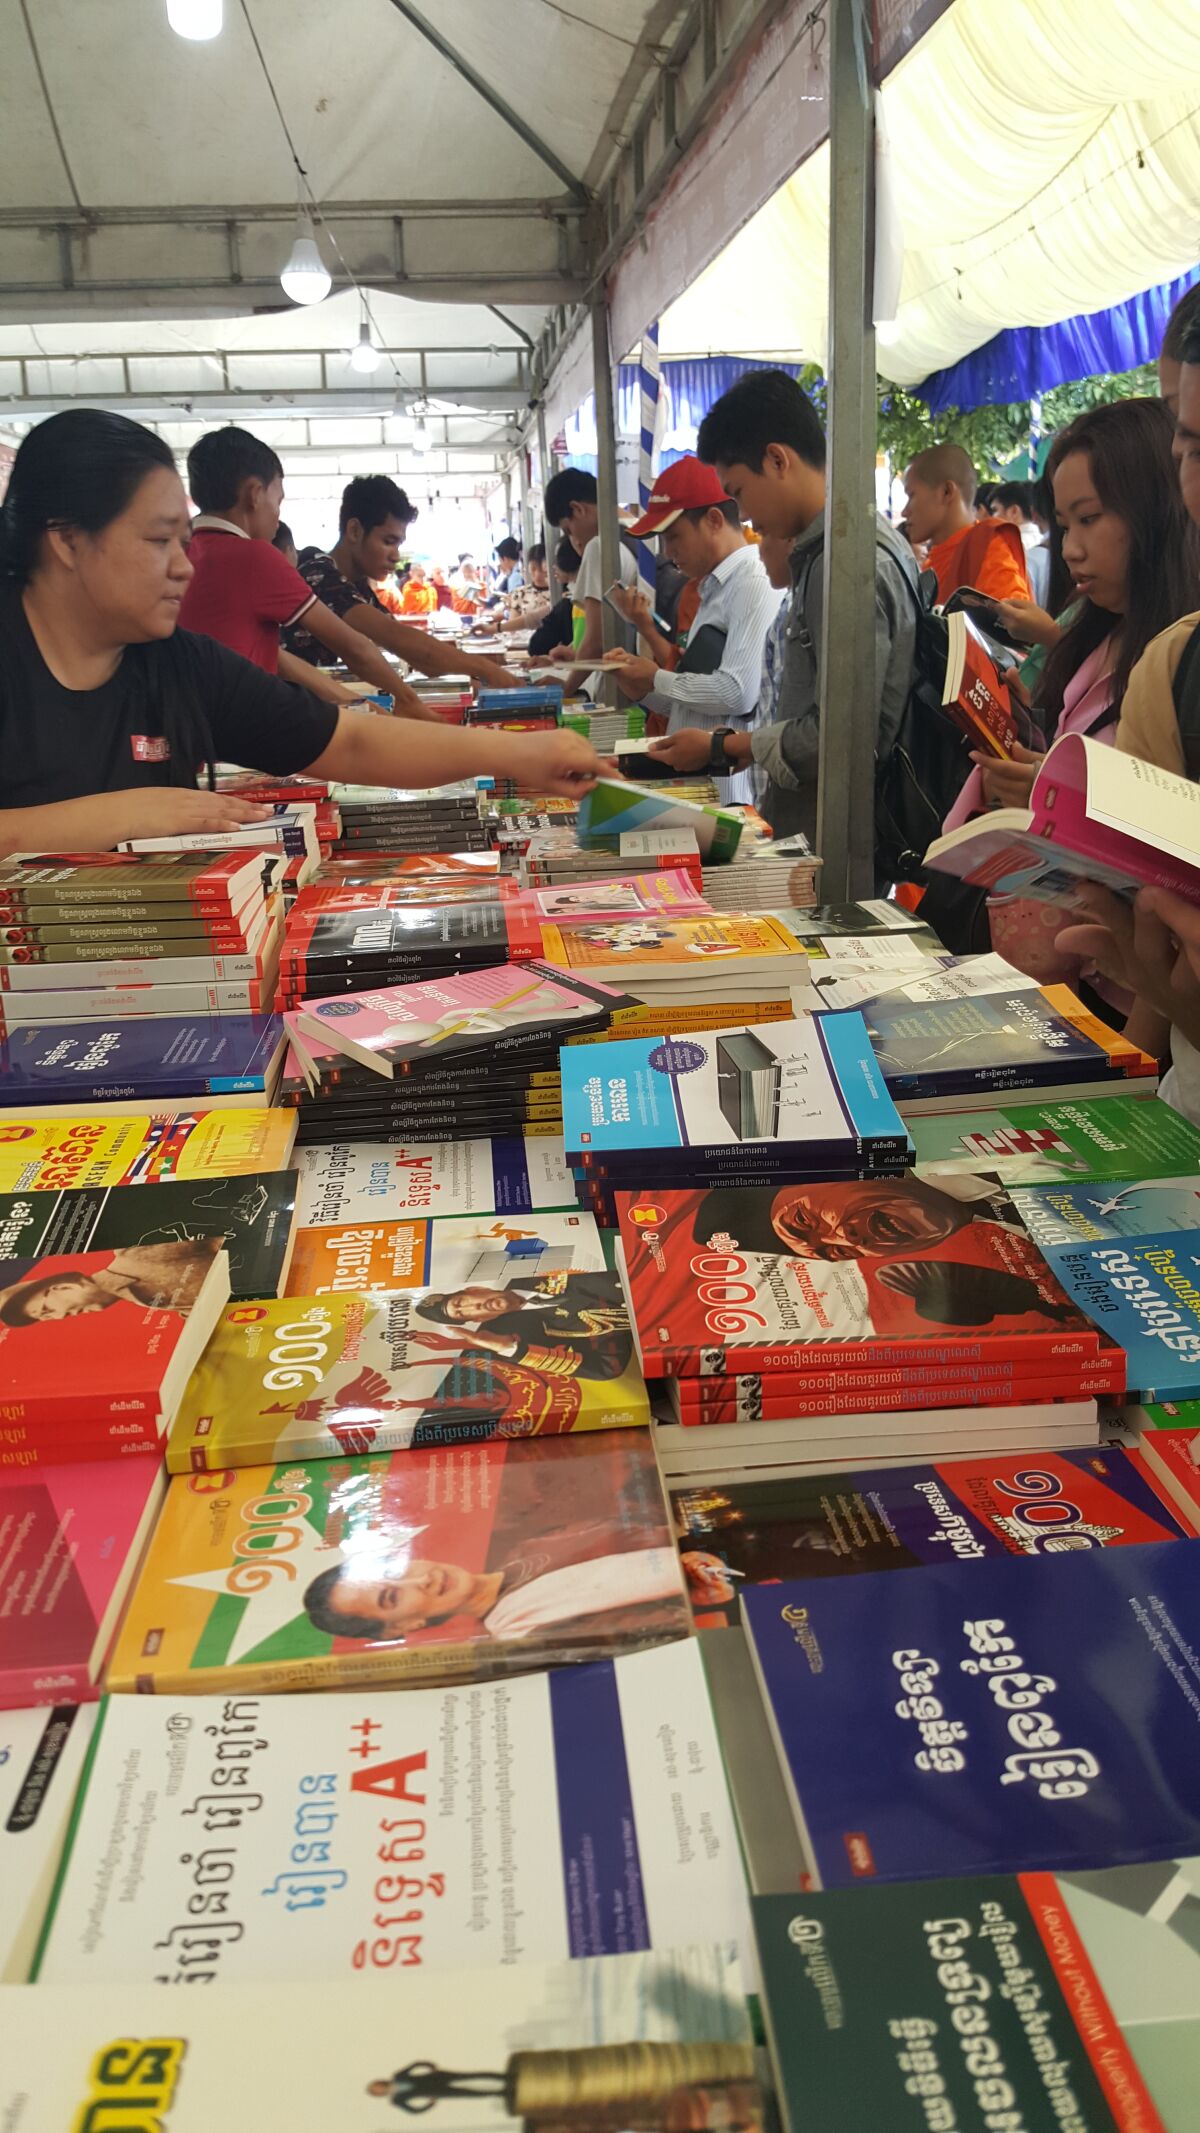 Jennifer Songster and Christina Nhek, librarians at the Mark Twain branch of the Long Beach Public Library, trekked to Phnom Penh 13 months ago to attend the seventh annual Cambodia Book Fair.